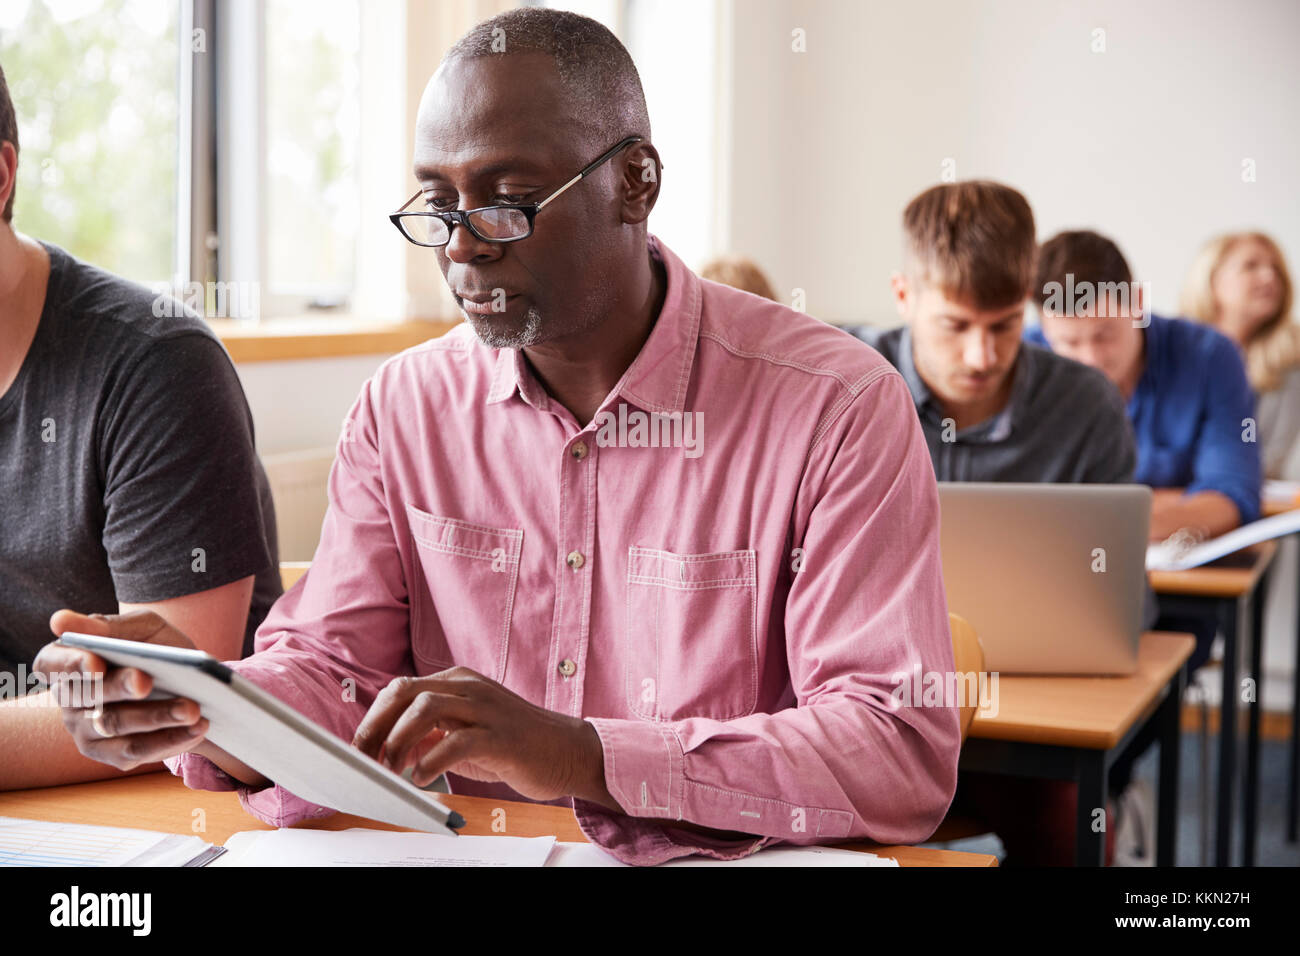 Mature Student Using Digital Tablet In Cours pour Adultes Banque D'Images